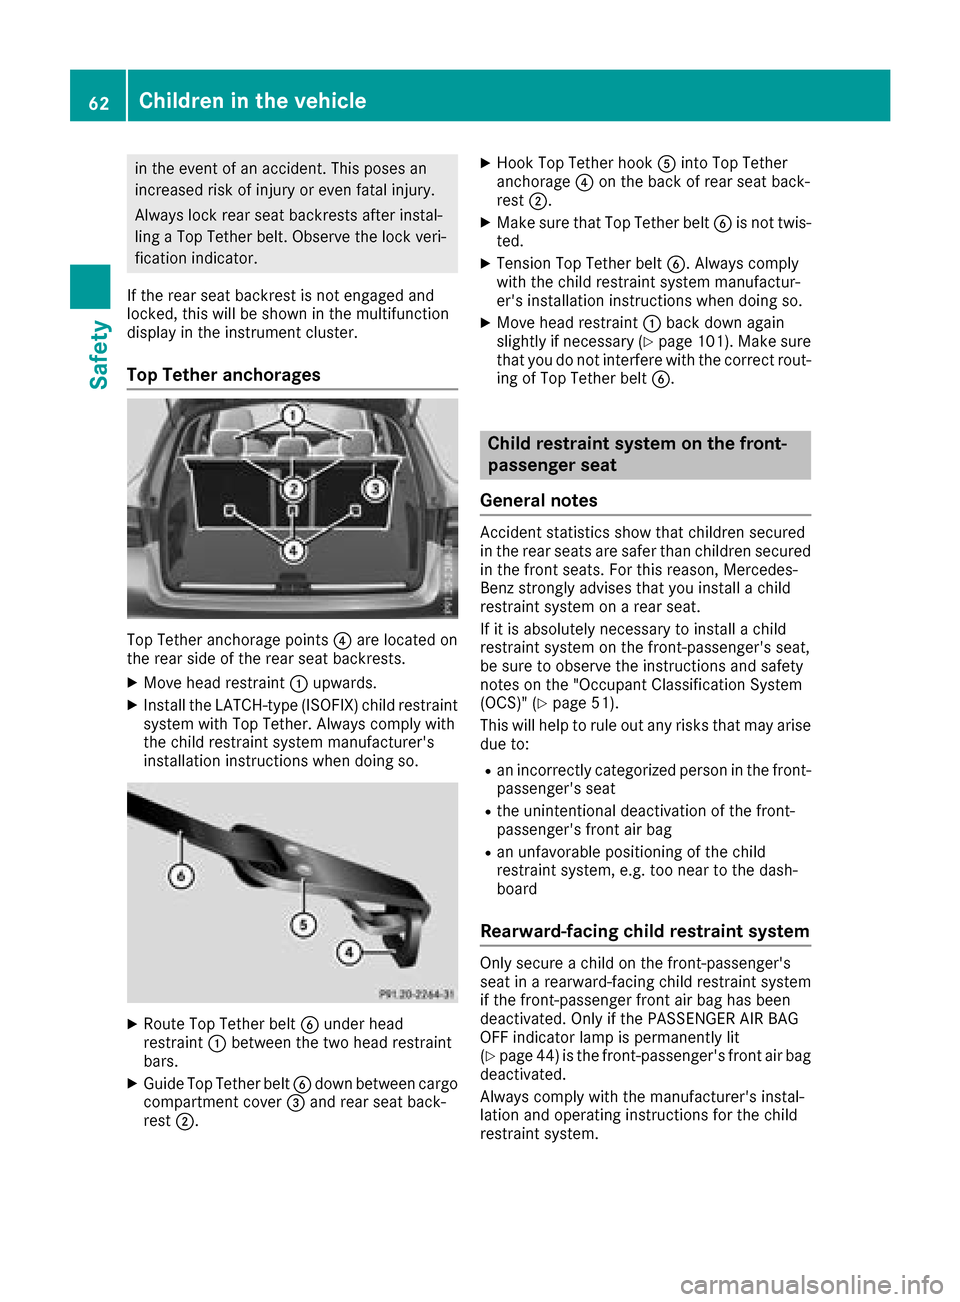 MERCEDES-BENZ GLC SUV 2017 X253 Owners Manual in the event of an accident. This poses an
increased risk of injury or even fatal injury.
Always lock rear seat backrests after instal-
ling a Top Tether belt. Observe the lock veri-
fication indicato